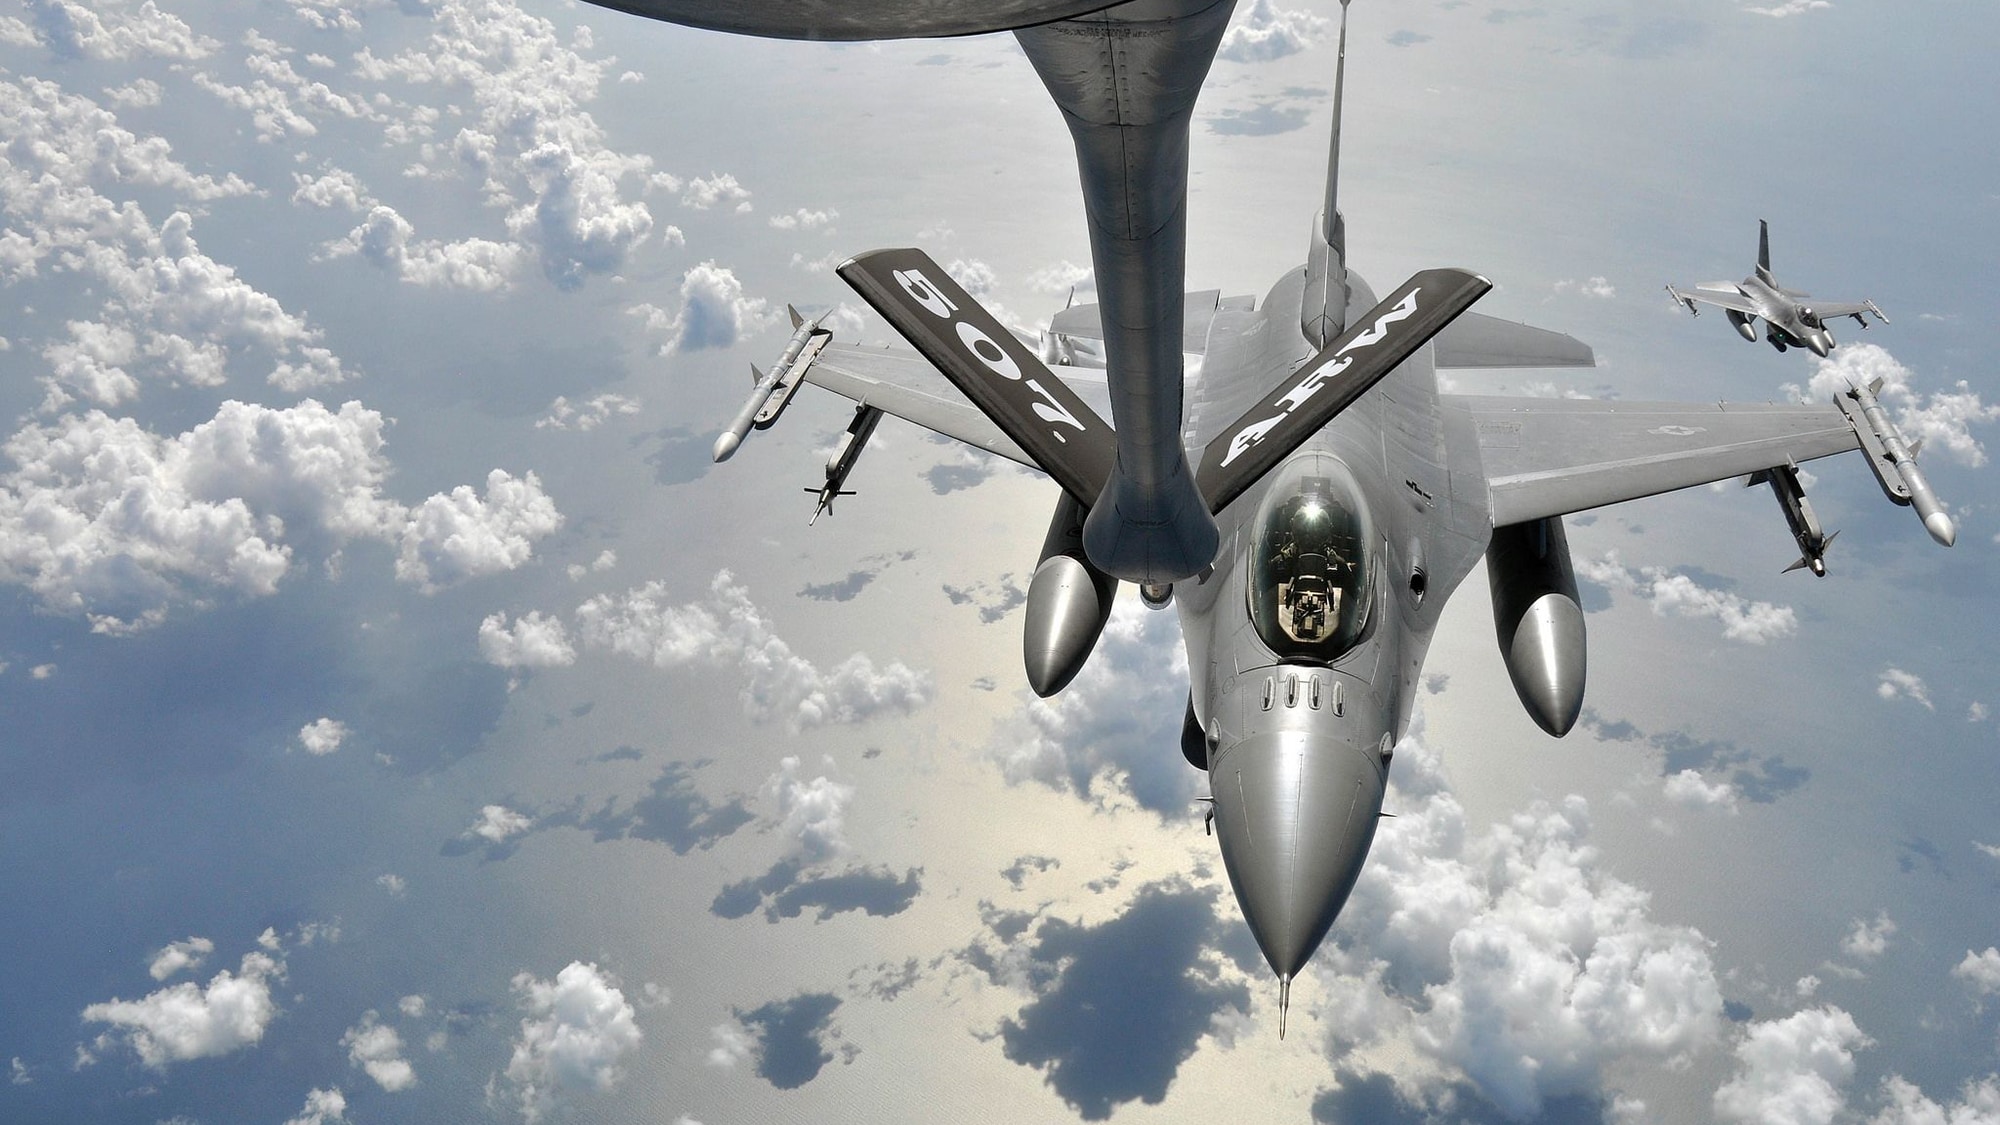 F-16 Fighting Falcon undergoing mid-air refueling [Image: U.S. Air Force via Flickr]